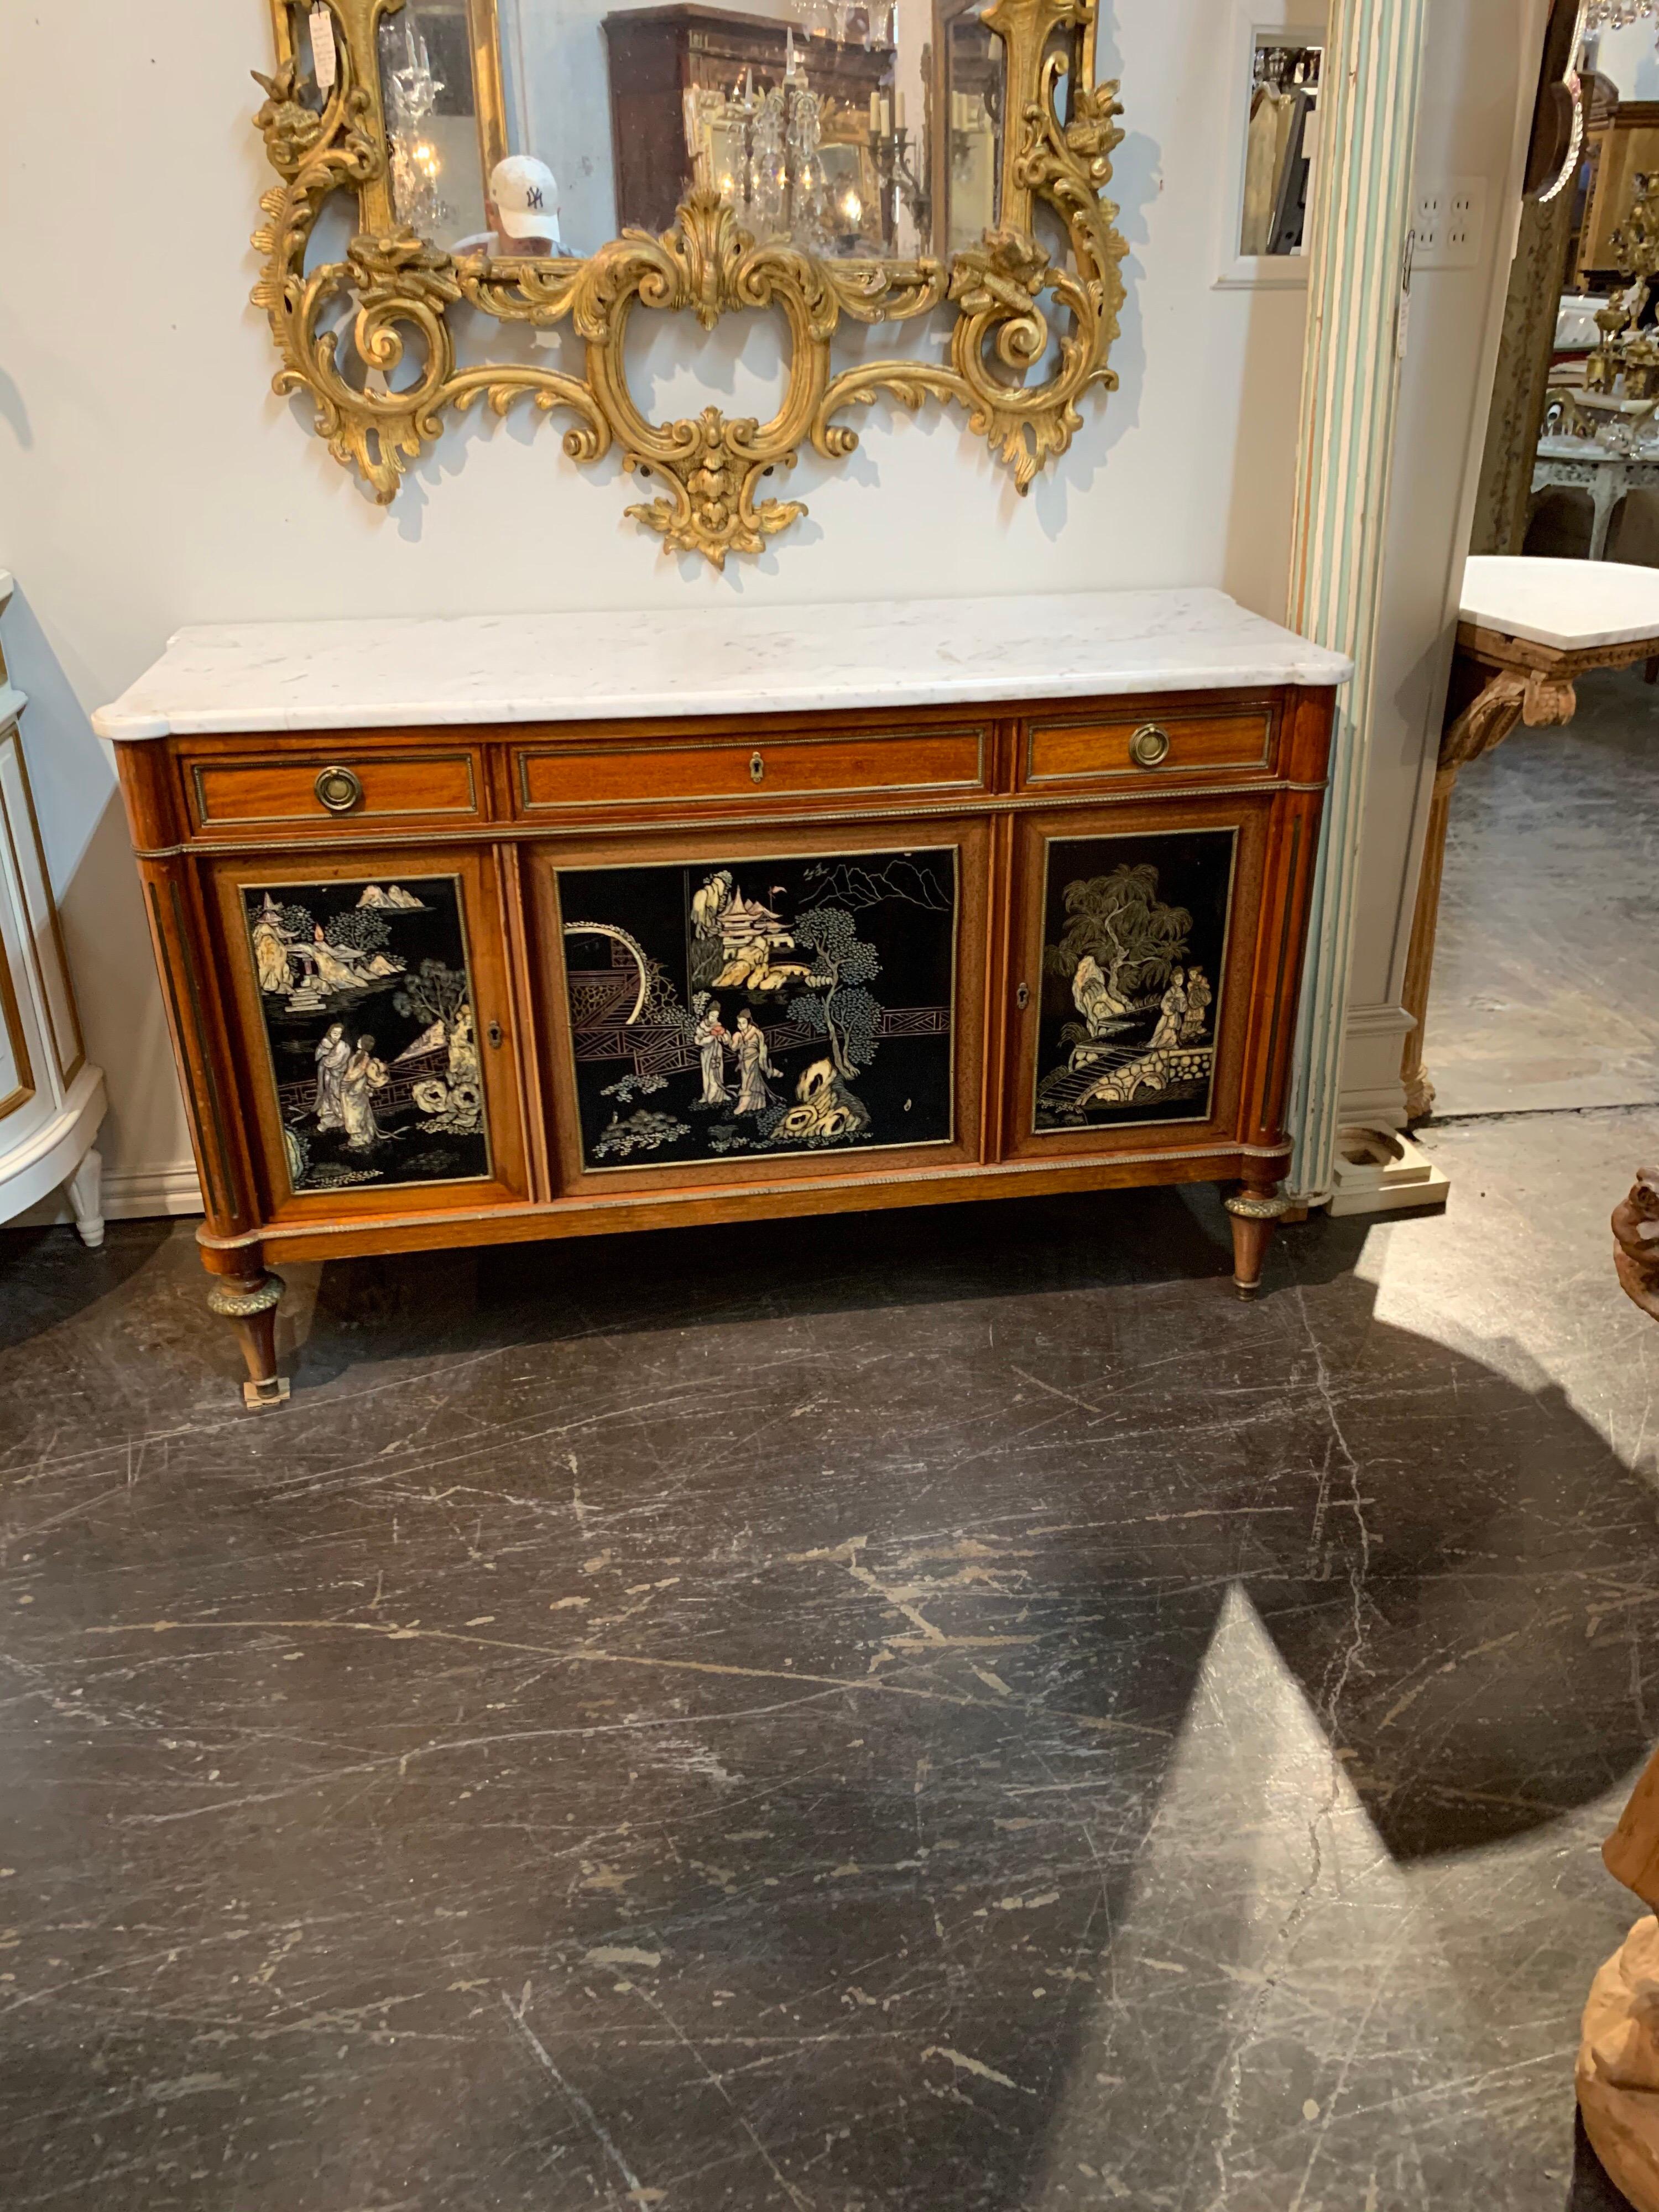 Elegant French Directoire style mahogany and chinoiserie side cabinet. Beautiful images that seem to tell a story! The piece has a very nice Carrara marble top as well. Very unique!